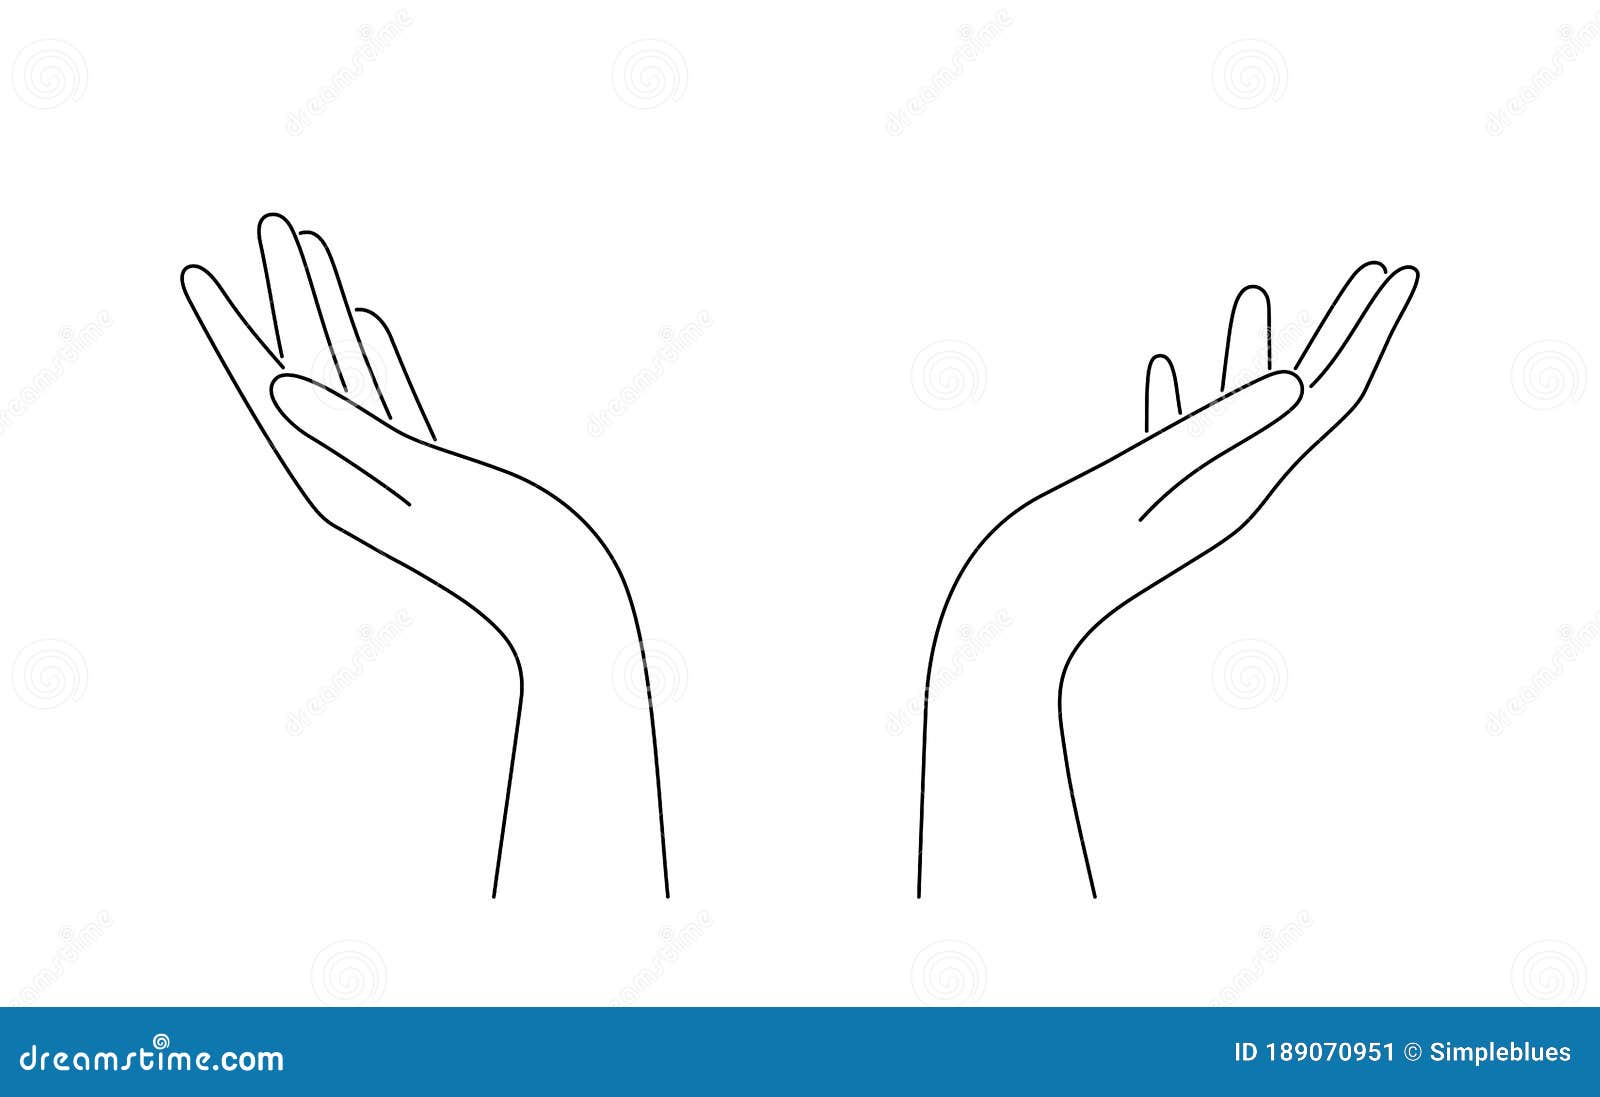 Cupped Hand Outline Stock Illustrations 163 Cupped Hand Outline Stock Illustrations Vectors Clipart Dreamstime